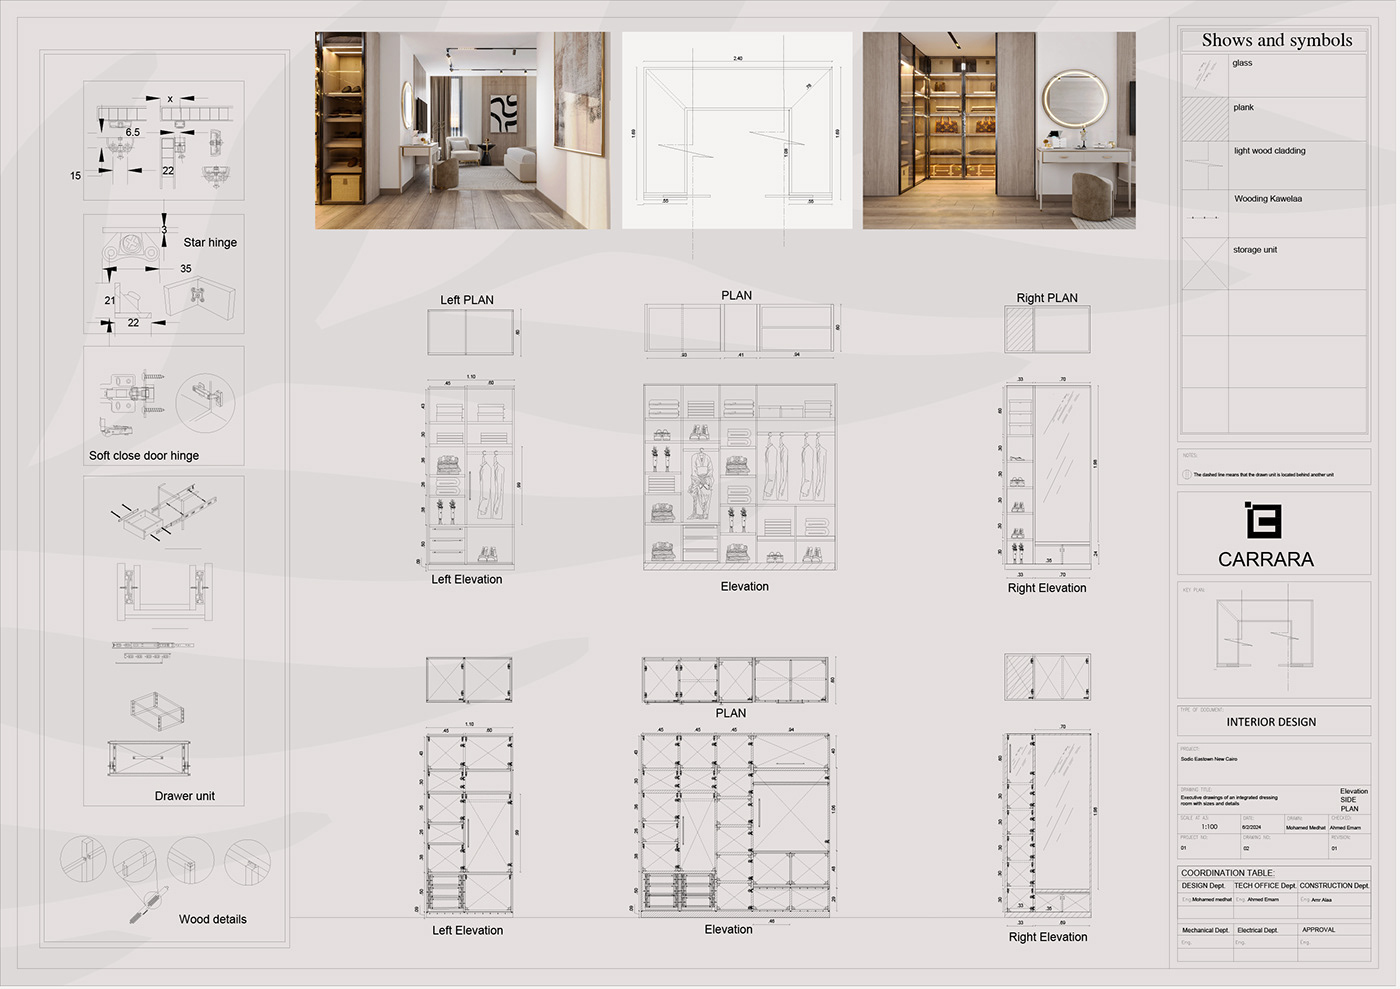 Drawing  shop drawing architecture interior design  shop drawing details working drawings AutoCAD revit BIM visualization